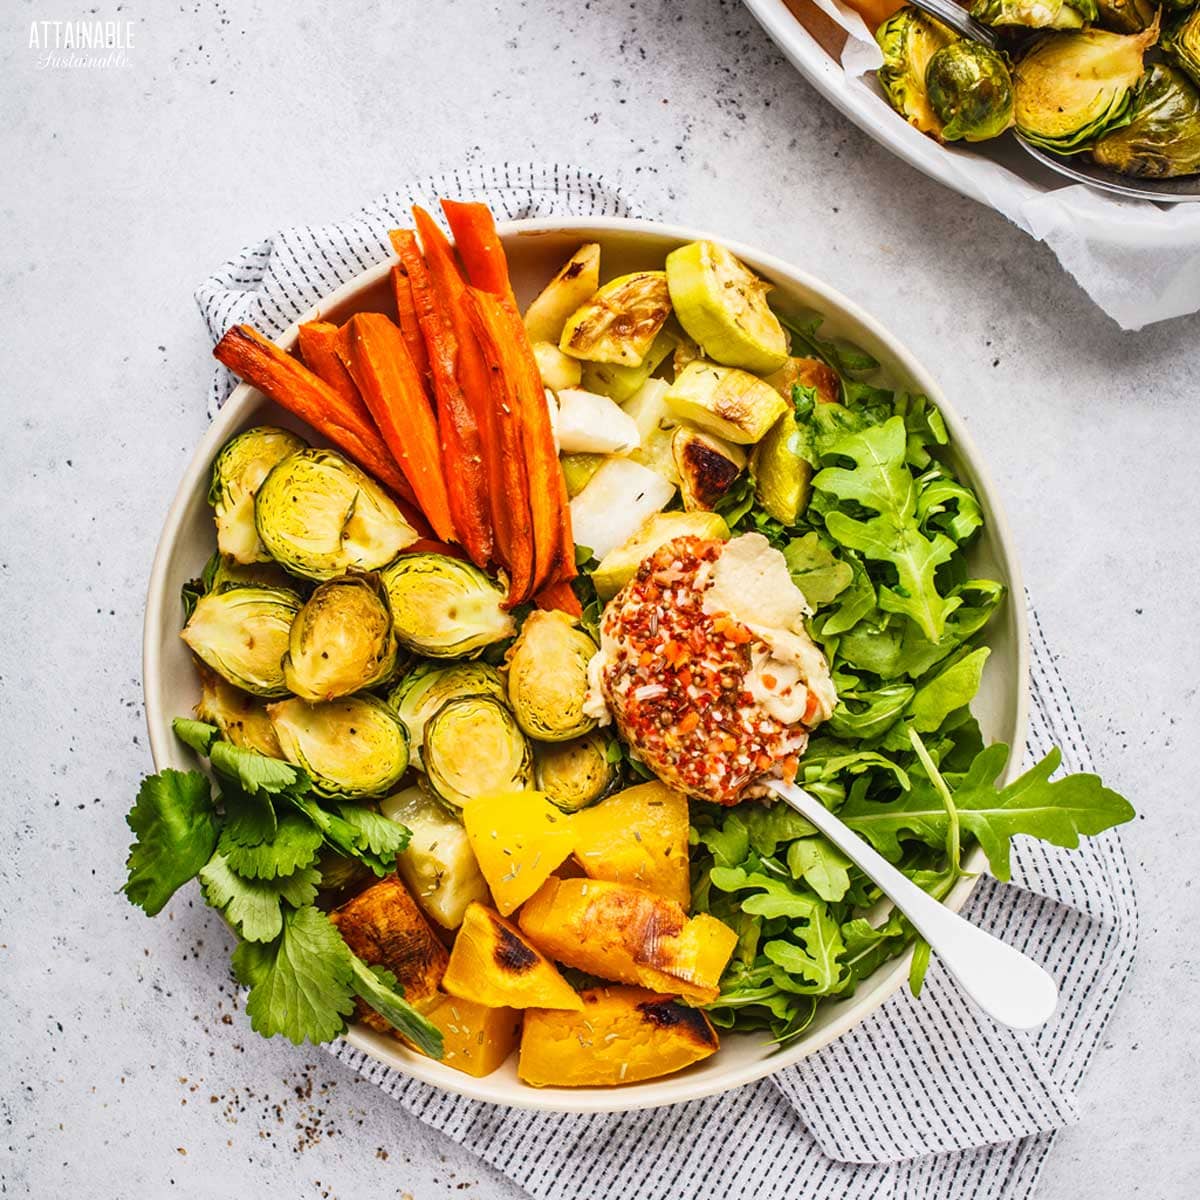 bowl with roasted veggies and hummus from above.